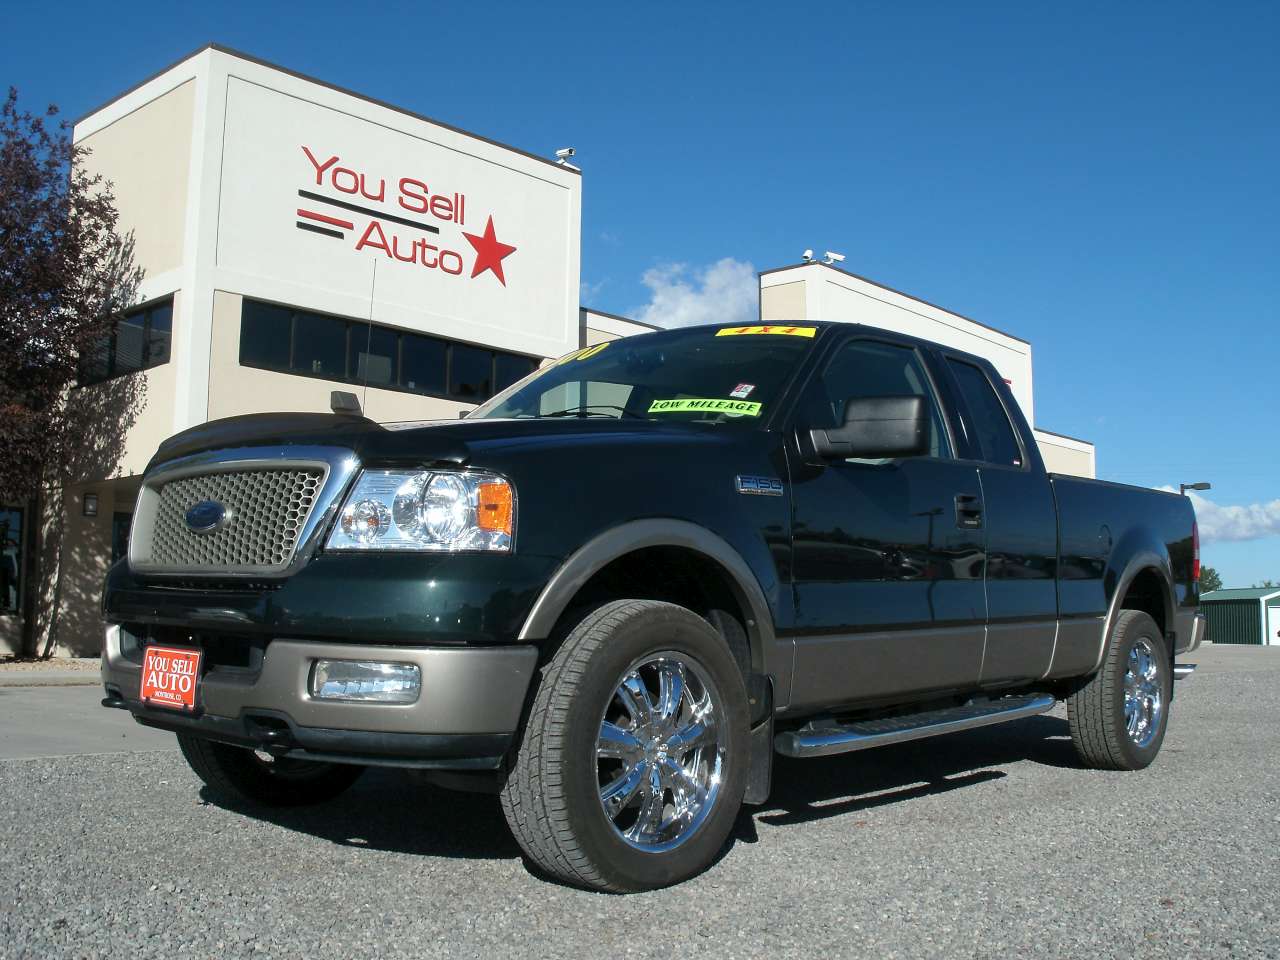 2004 FORD F150 Lariat Supercab 4x4 19,500 You Sell Auto